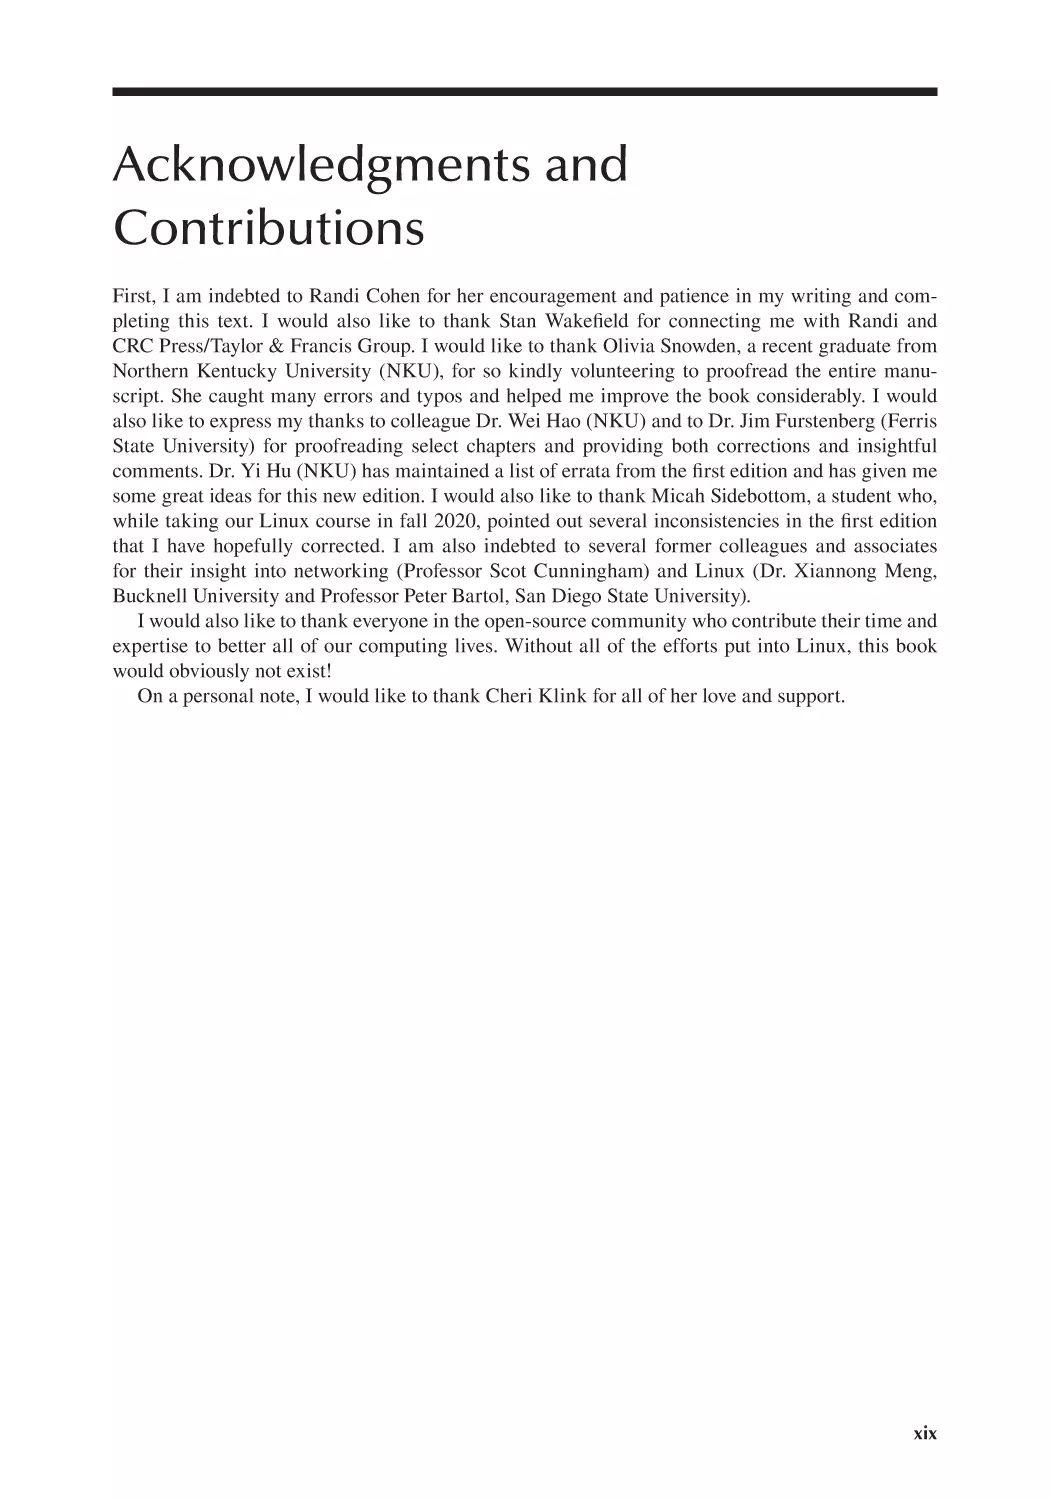 Acknowledgments and Contributions